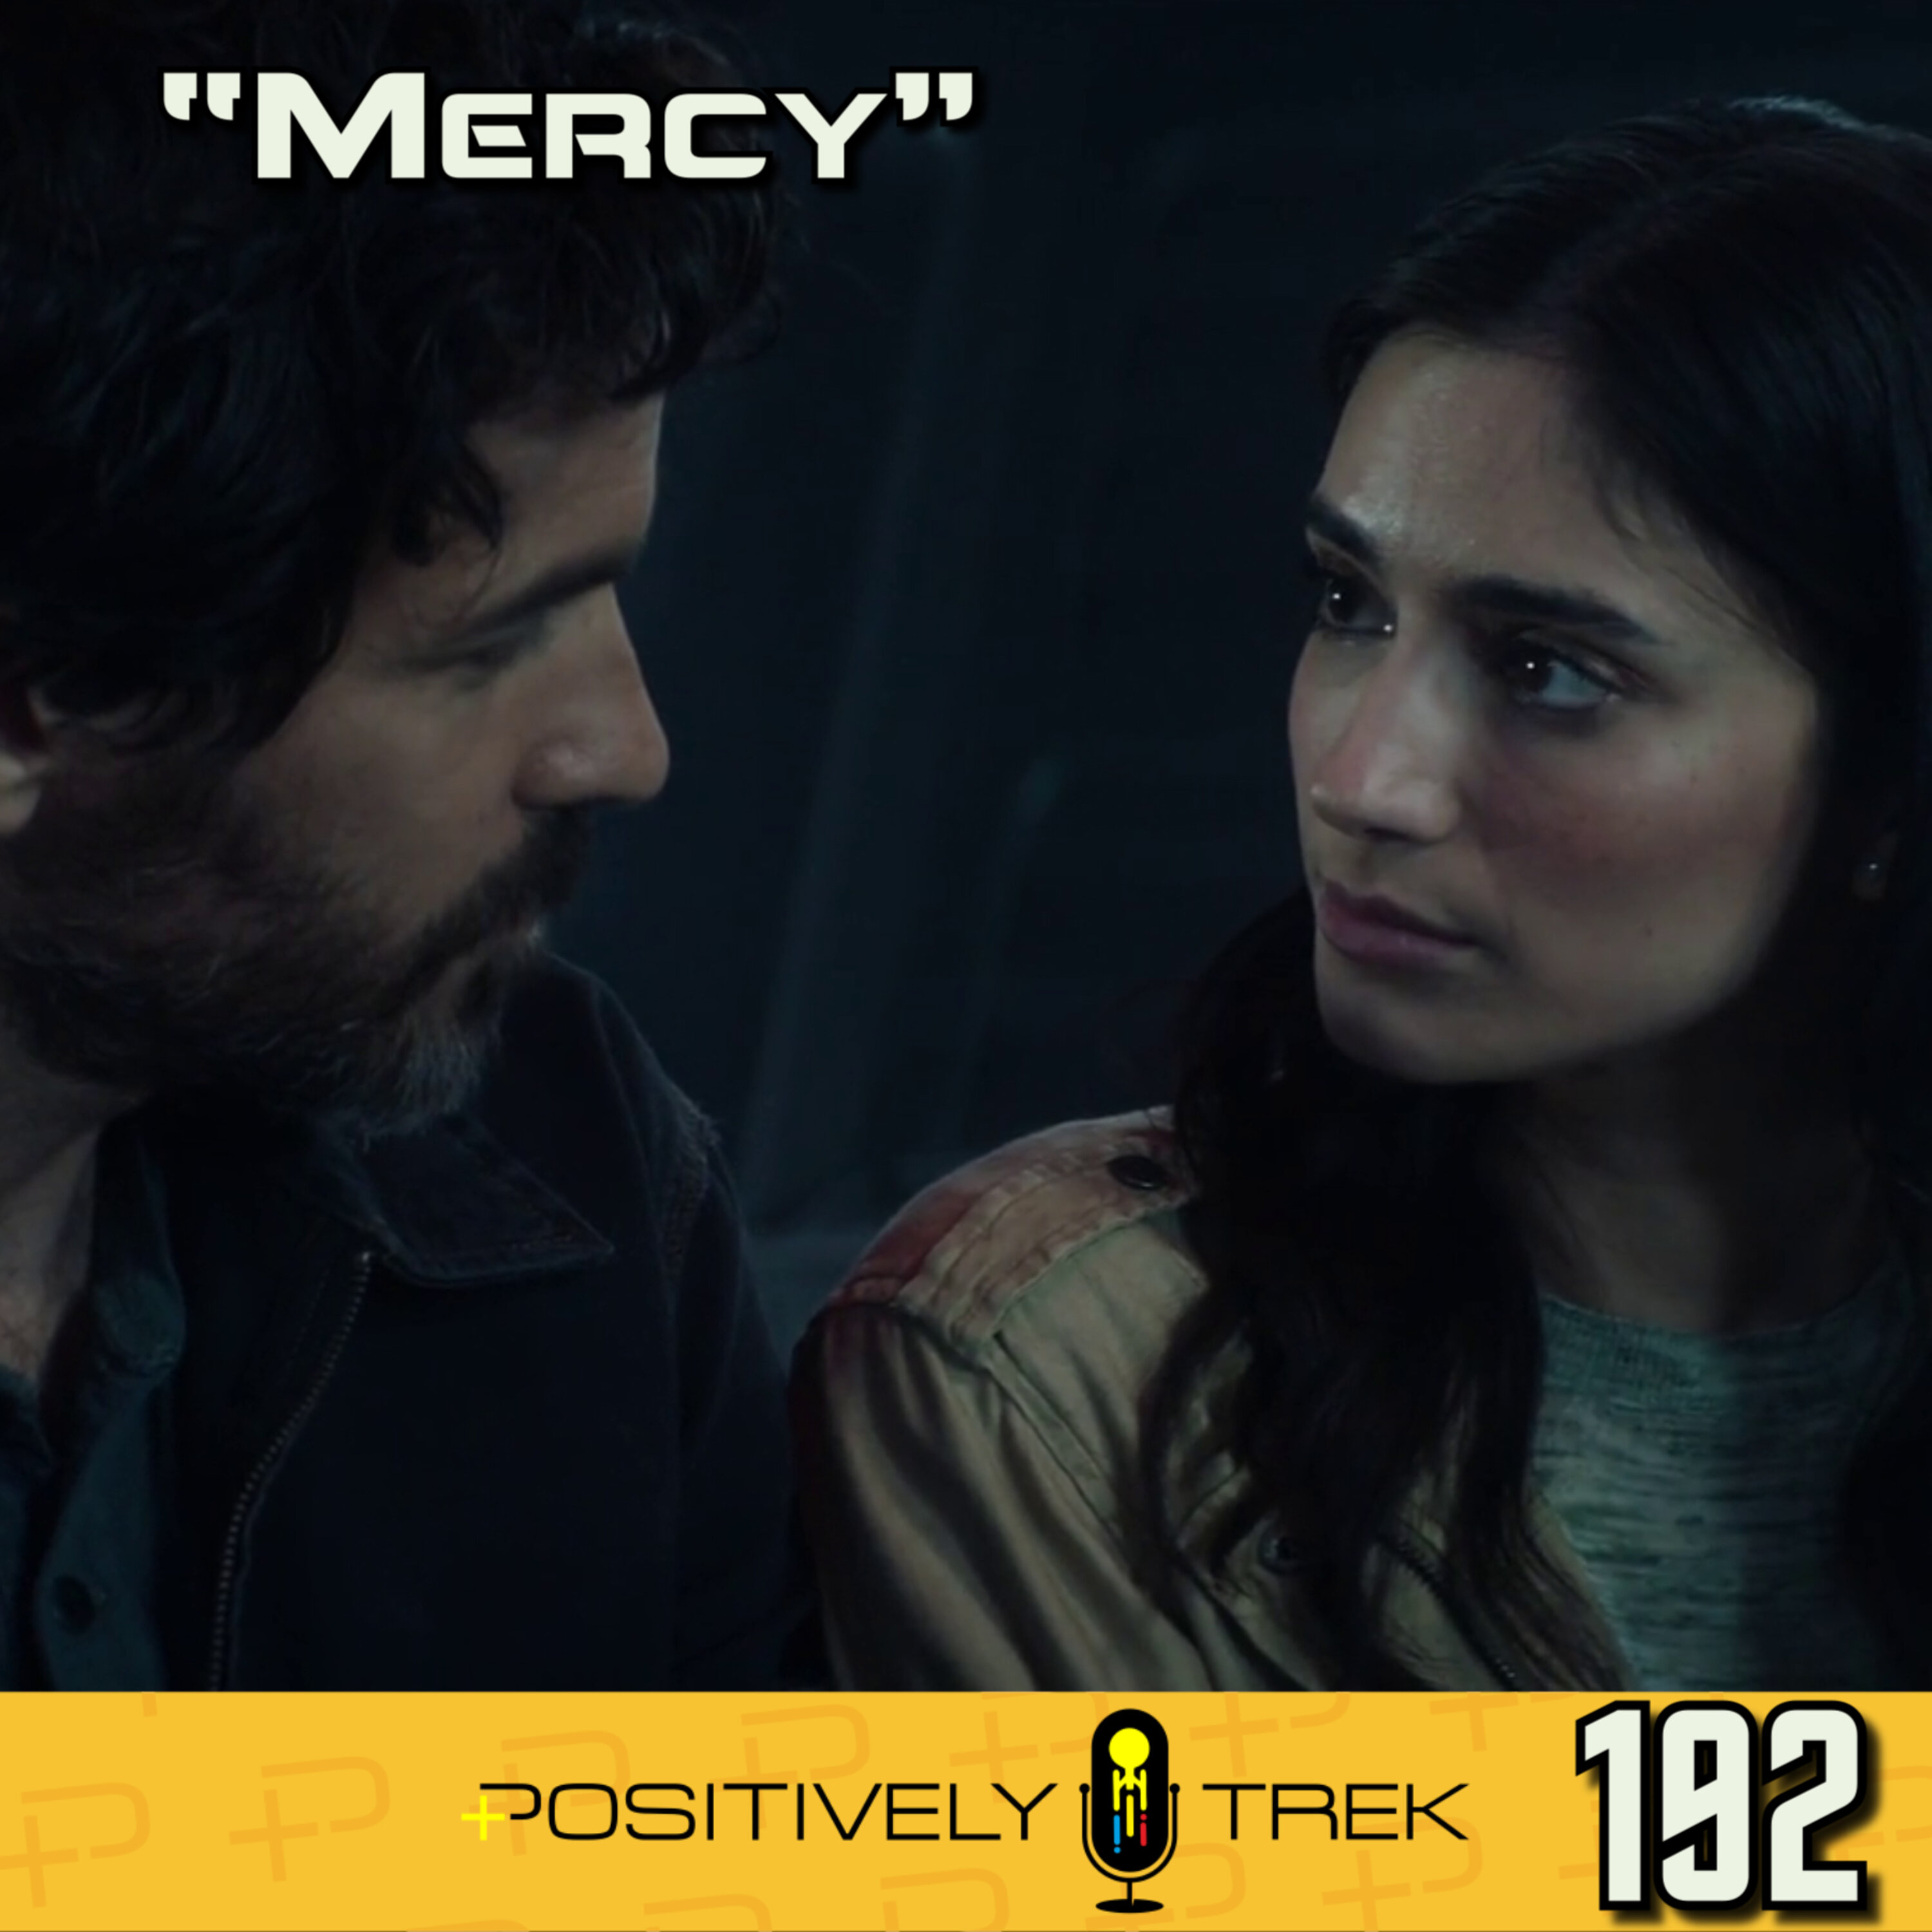 Picard Review: “Mercy” (2.08)